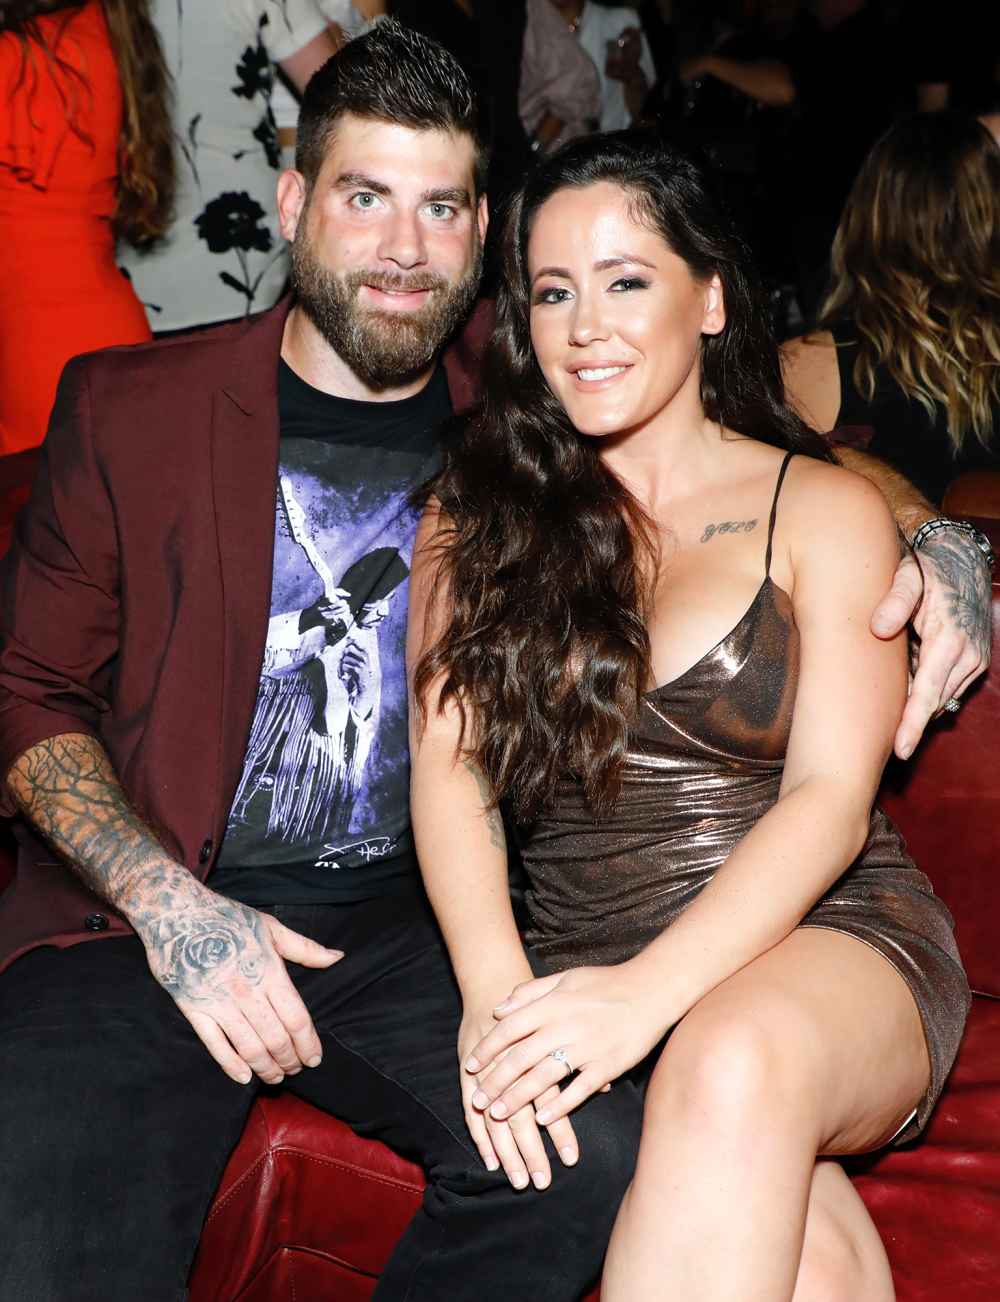 Jenelle Evans Doesn't 'Care' What People Say About Her Reconciliation With David Eason